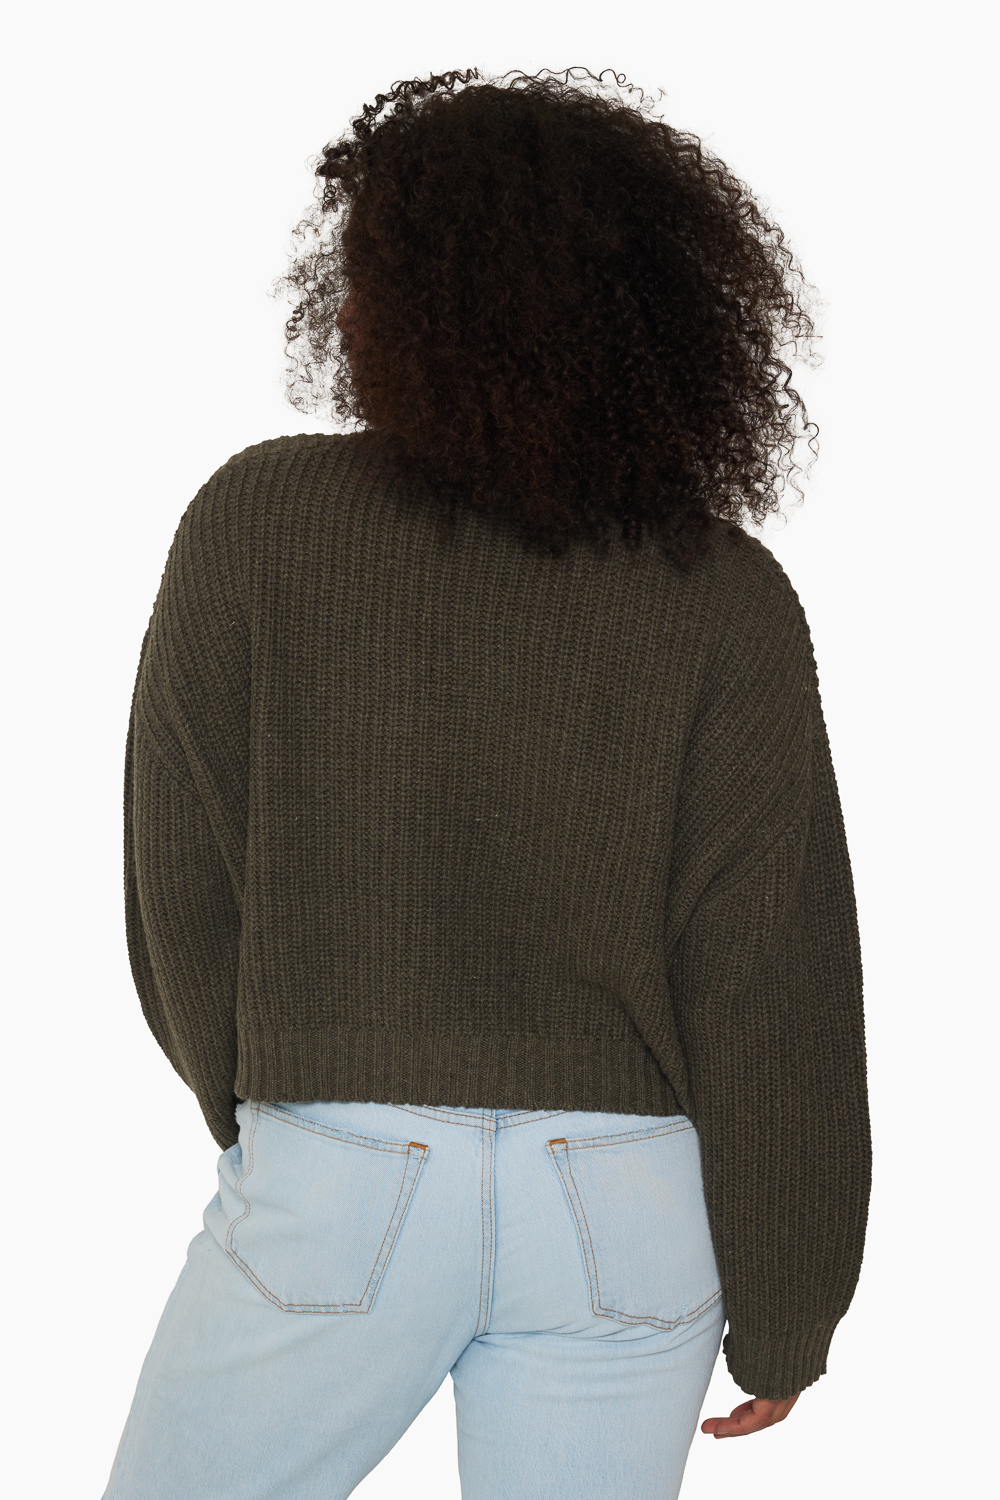 SET™ CROPPED CREWNECK IN SHADOW